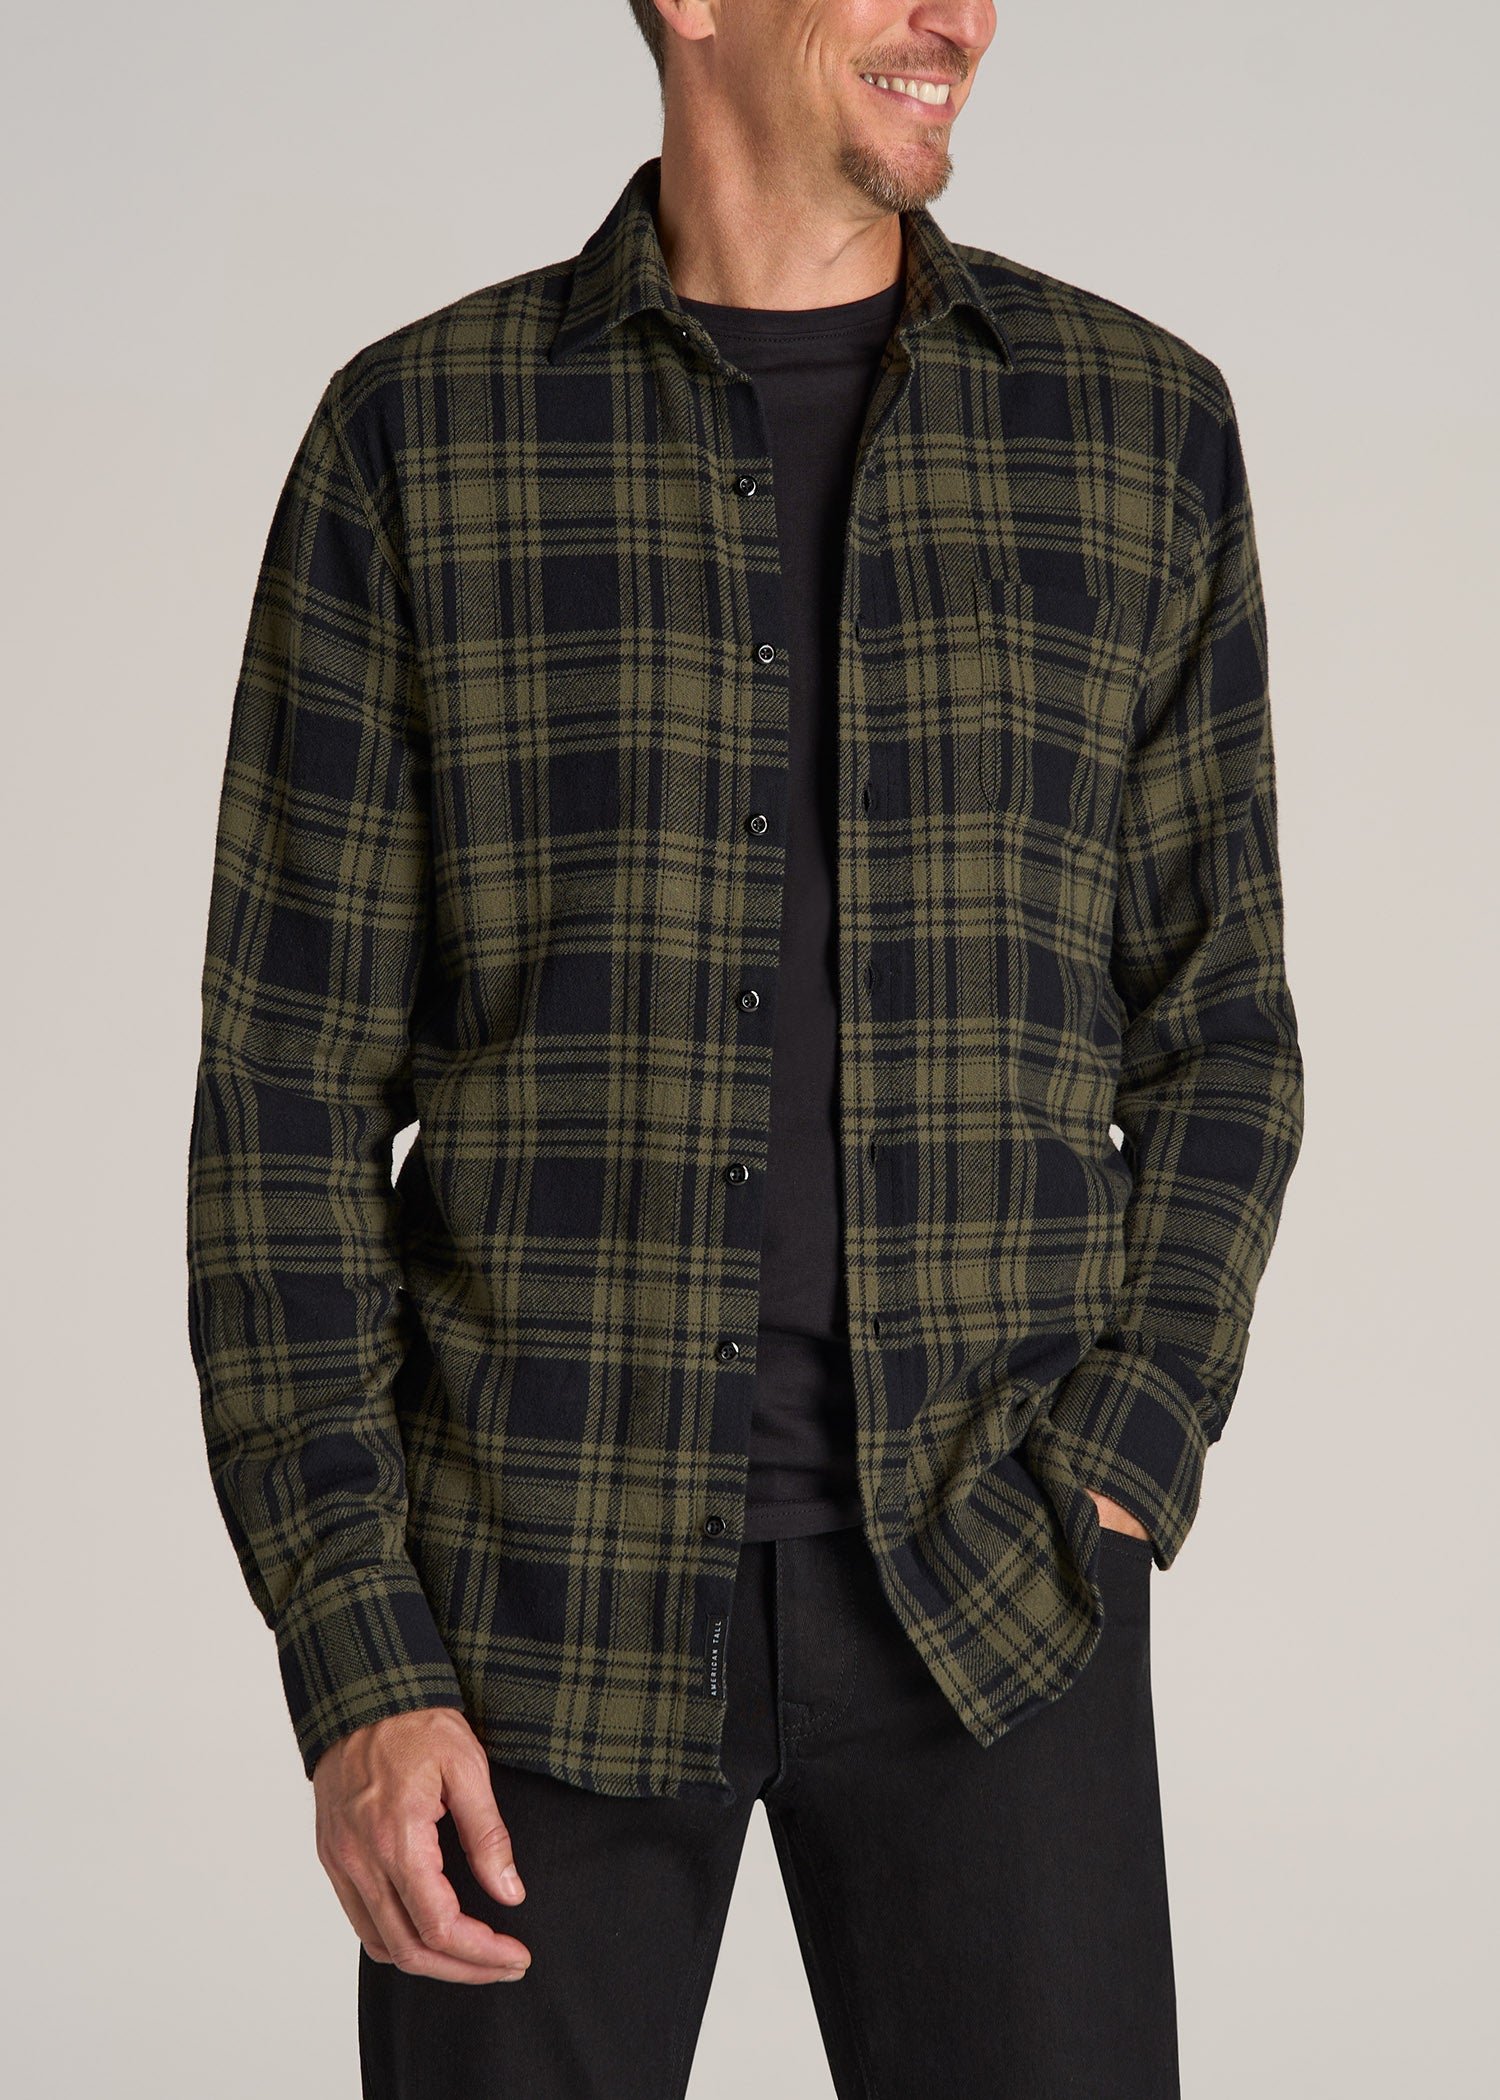 Nelson Flannel Shirt for Tall Men | American Tall